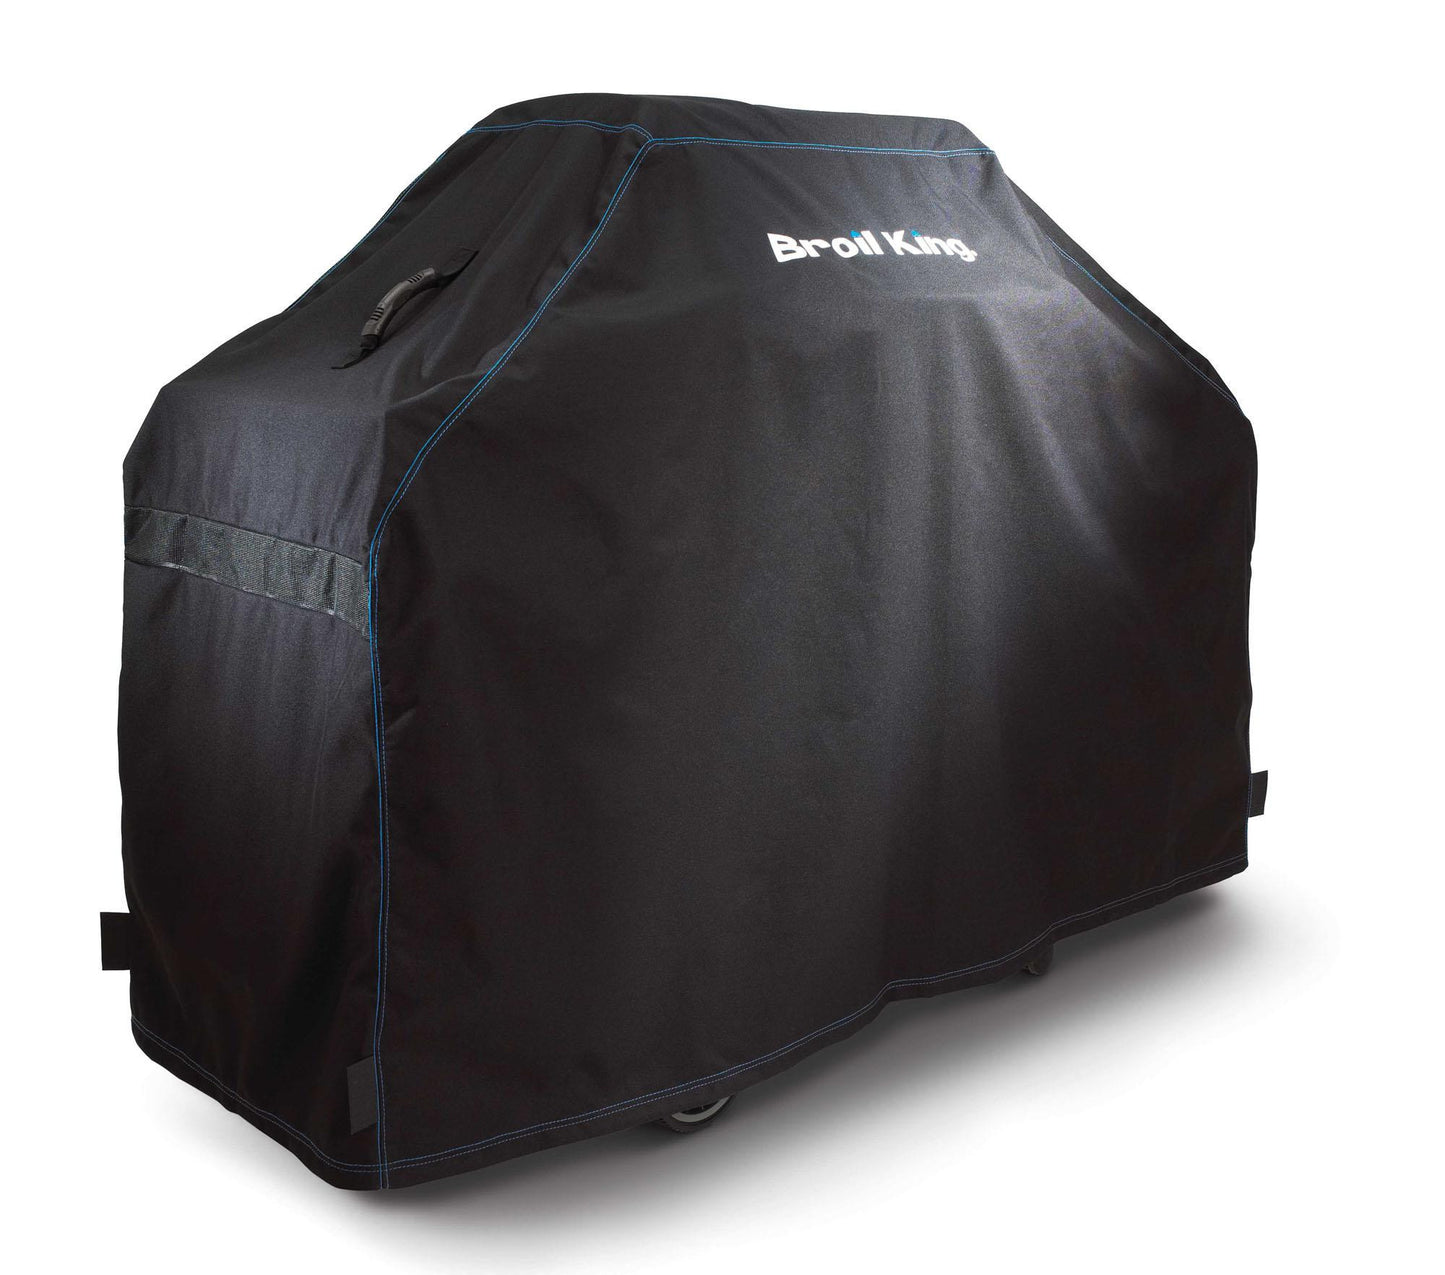 Broil King 76 Inch Heavy Duty Cover | 68490. Shop in-store or online with Barbecues Galore. We have 5 locations in total. 3 Located in the GTA: Burlington, Oakville & Etobicoke, Ontario. 2 Located in Calgary, Alberta.